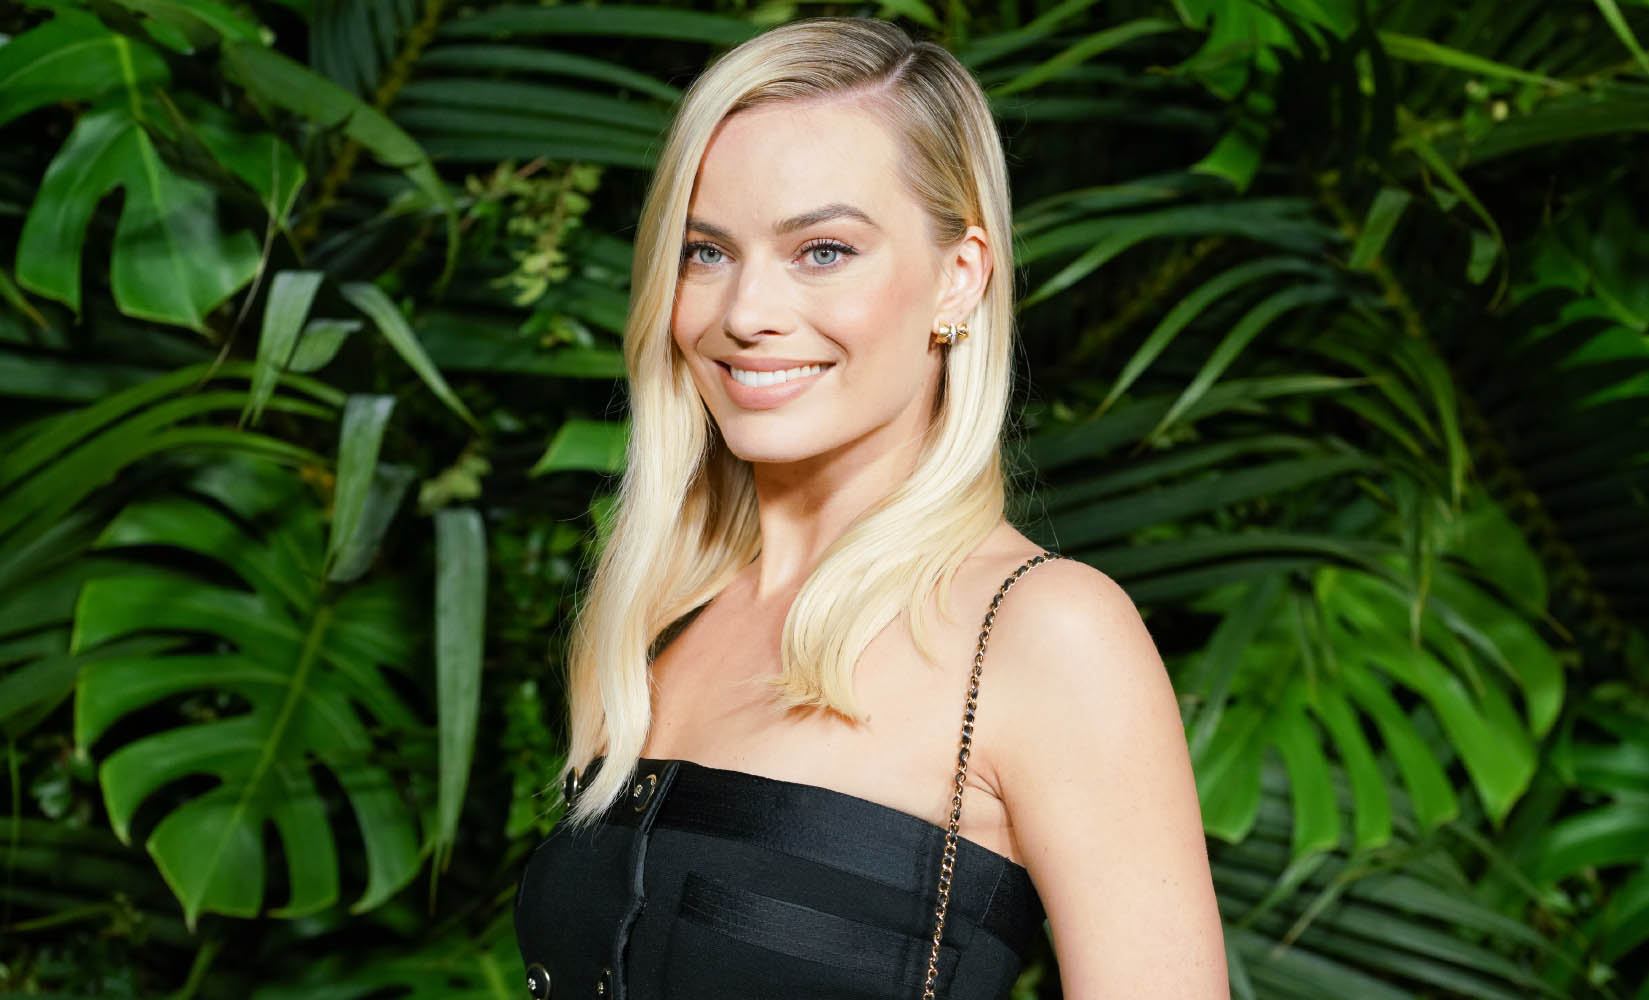 Margot Robbie in Chanel and Charles Finch 12th Annual Pre-Oscar Awards Dinner